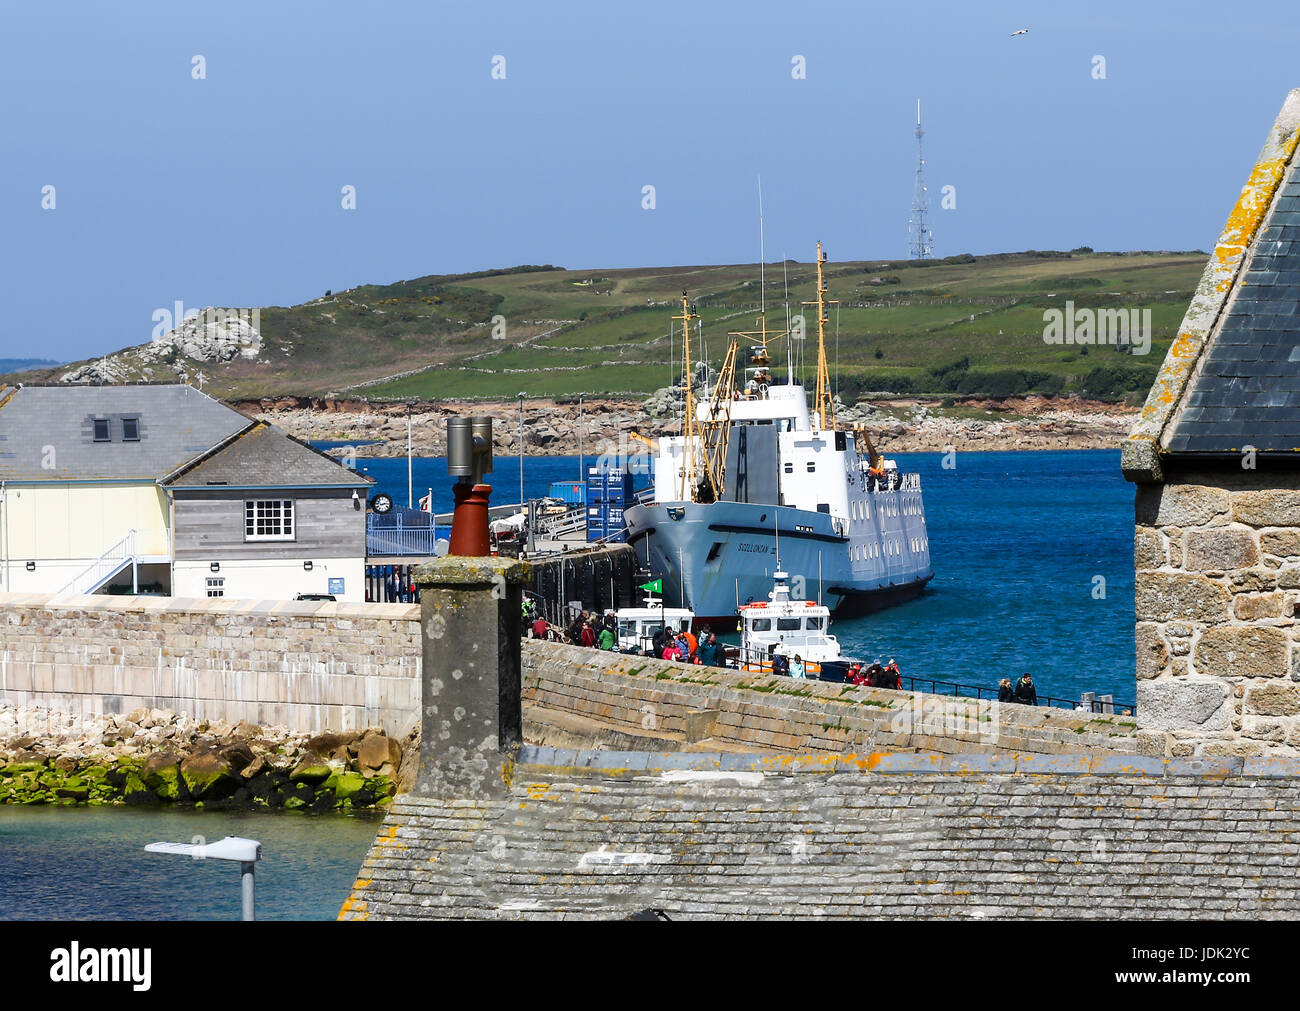 The Scillonian III boat in St. Mary's harbour St. Mary's, Isles of Scilly, Cornwall, England, UK Stock Photo